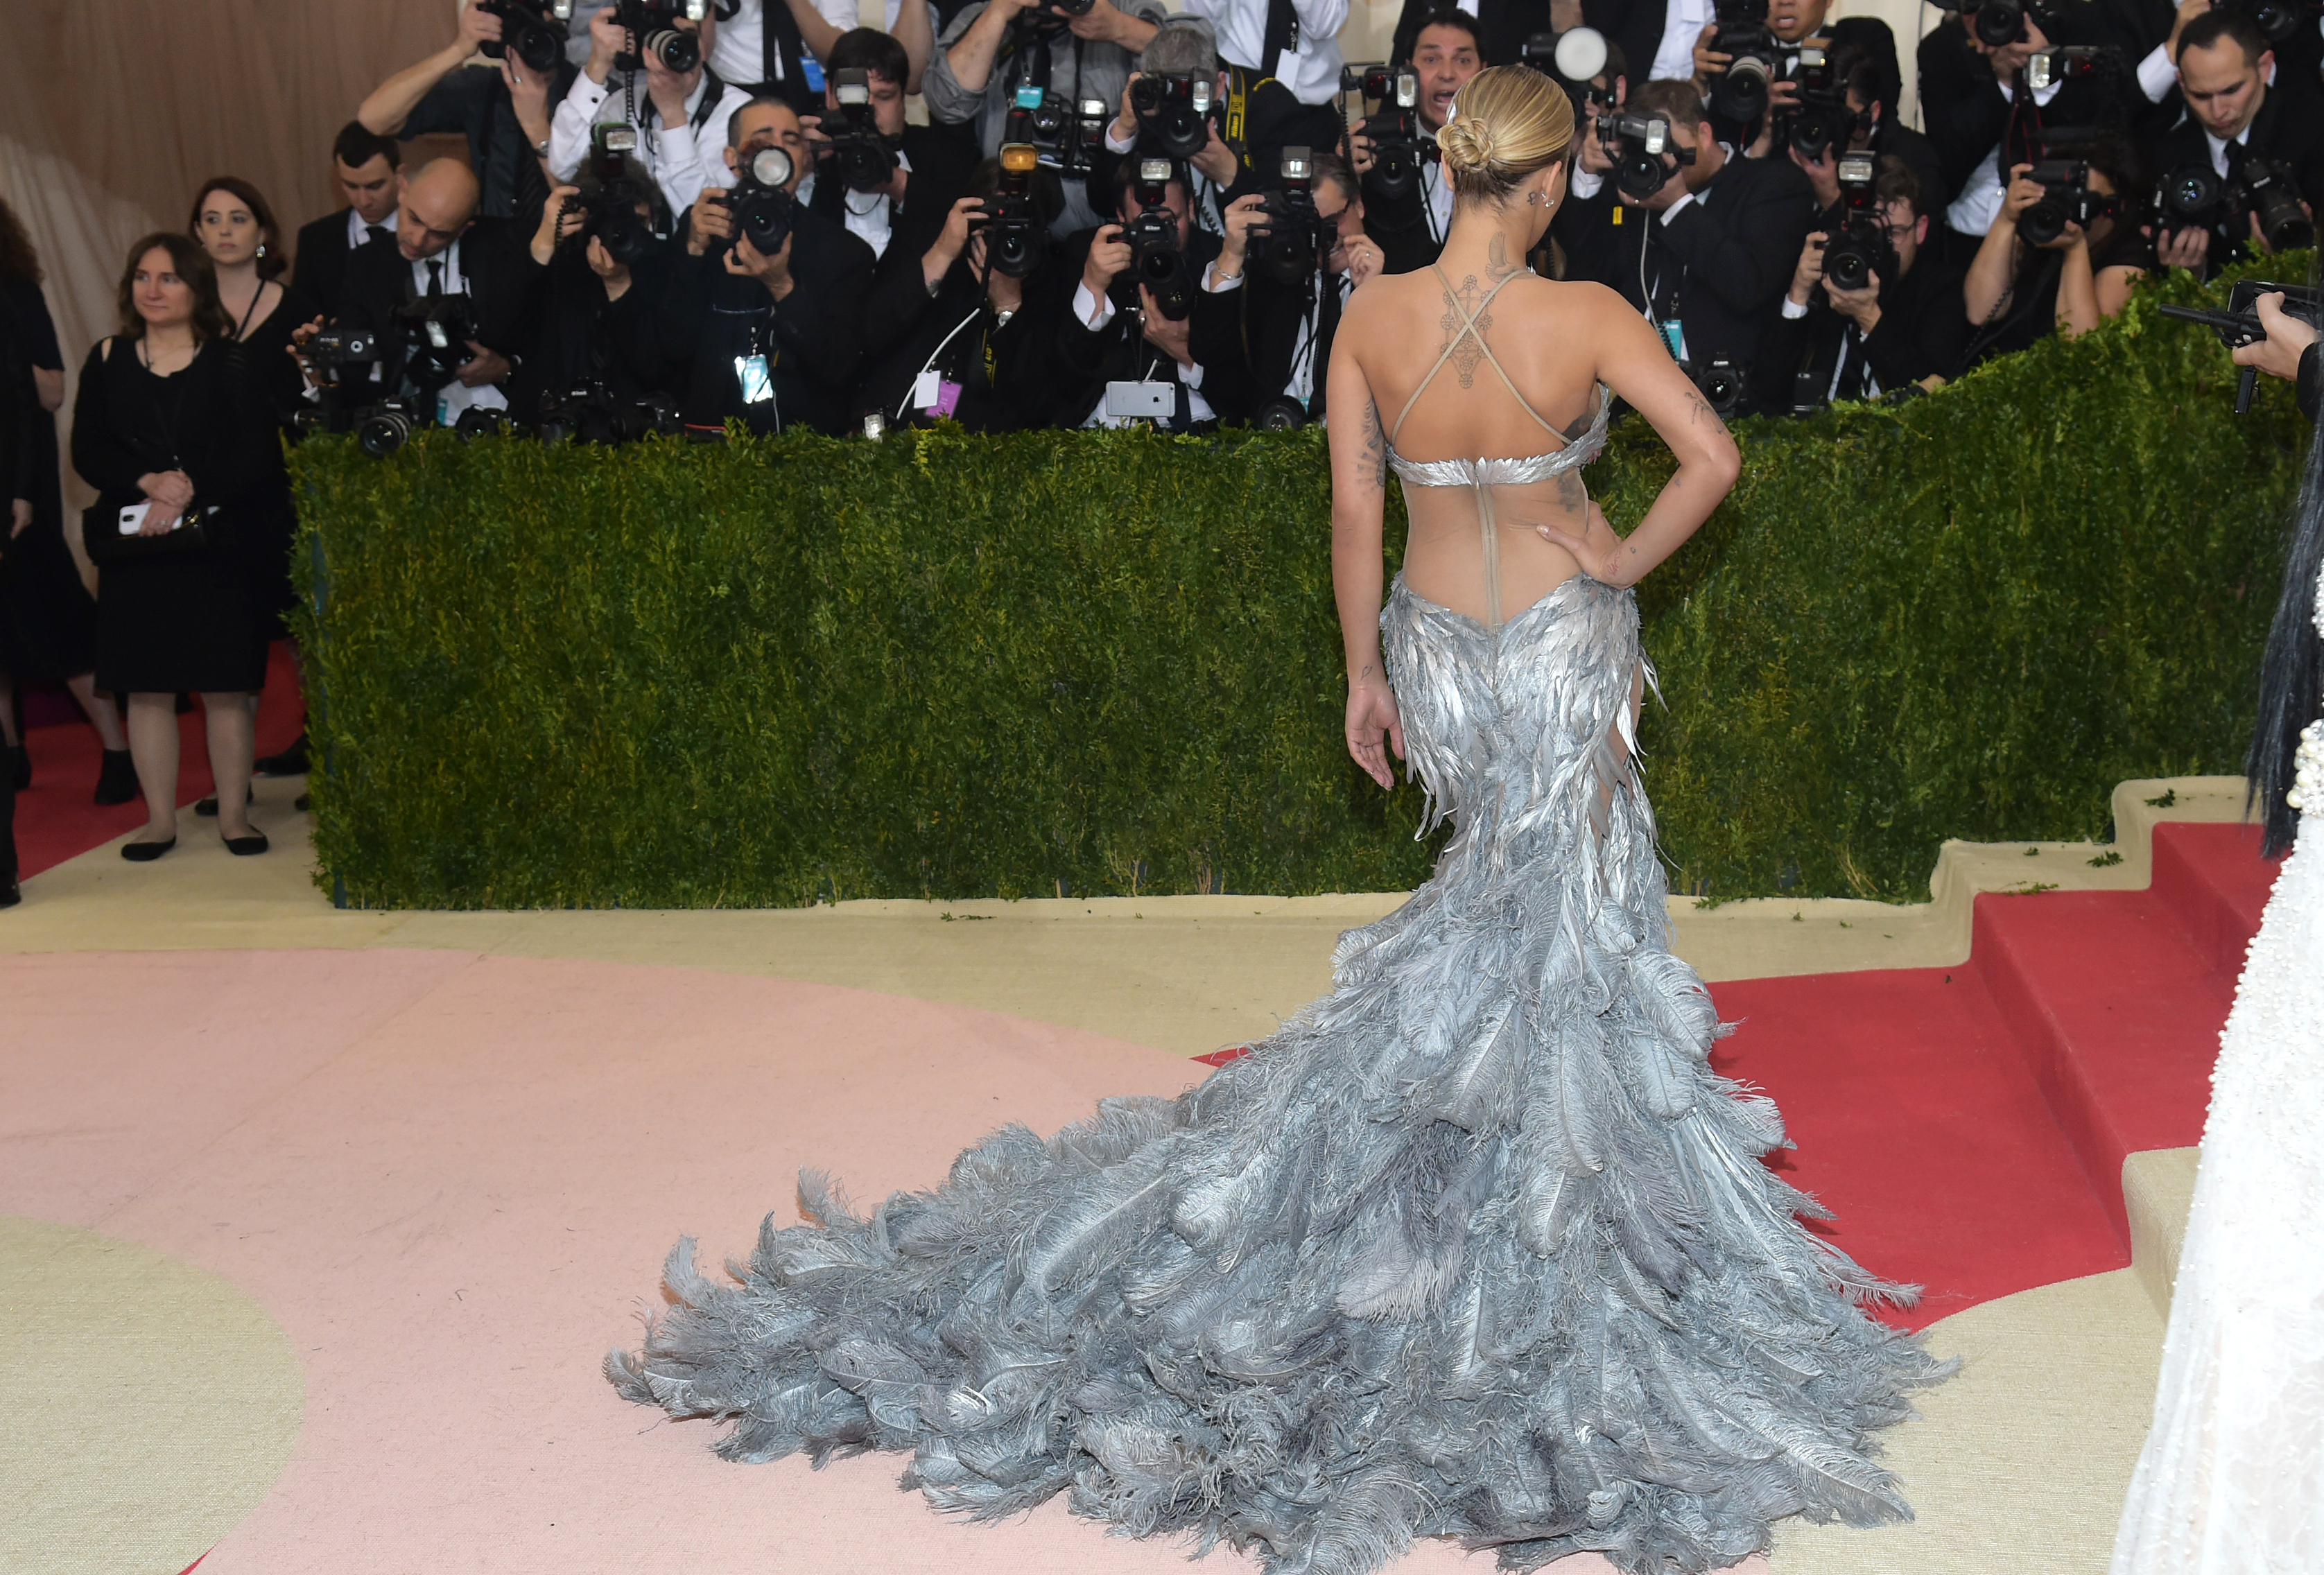 Singer Rita Ora wears the plumassier's feathers at the Met Gala in 2016.
